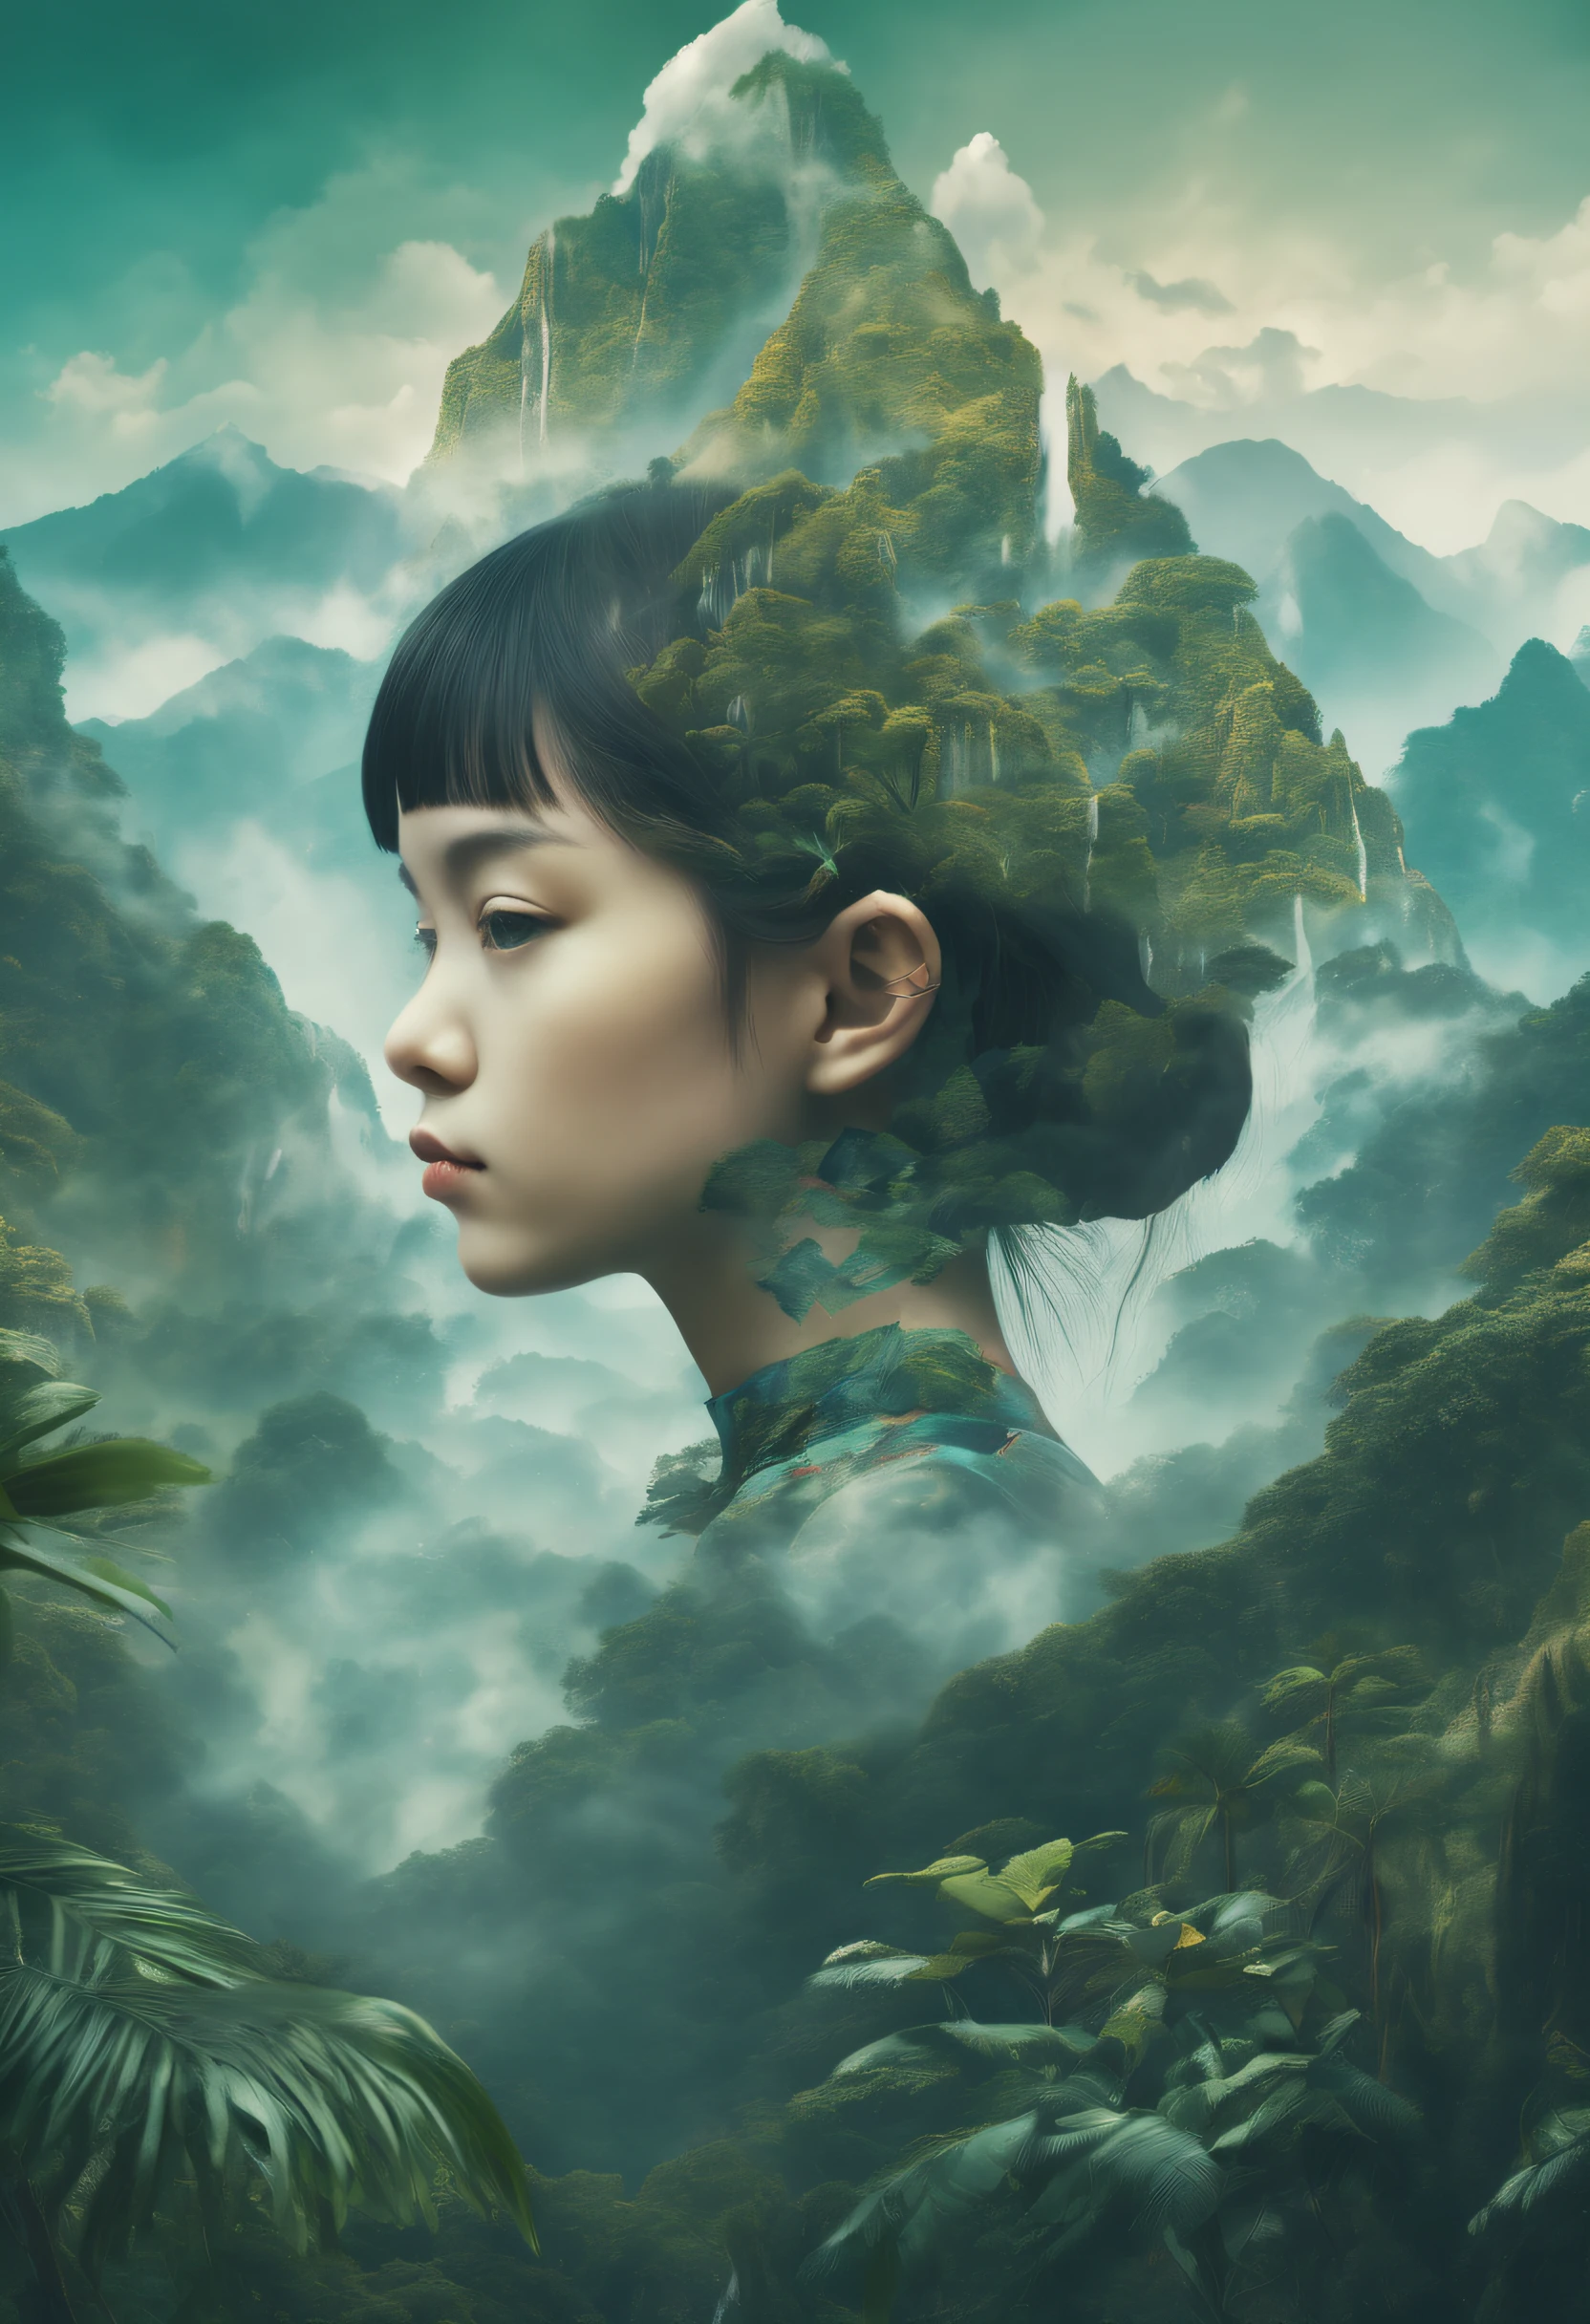 Dubrec style，Close-up of girl&#39;s avatar，Jungle mountains image foreground，（multiple exposure：1.8），Complex illustrations in surrealist art style，Surreal dreams